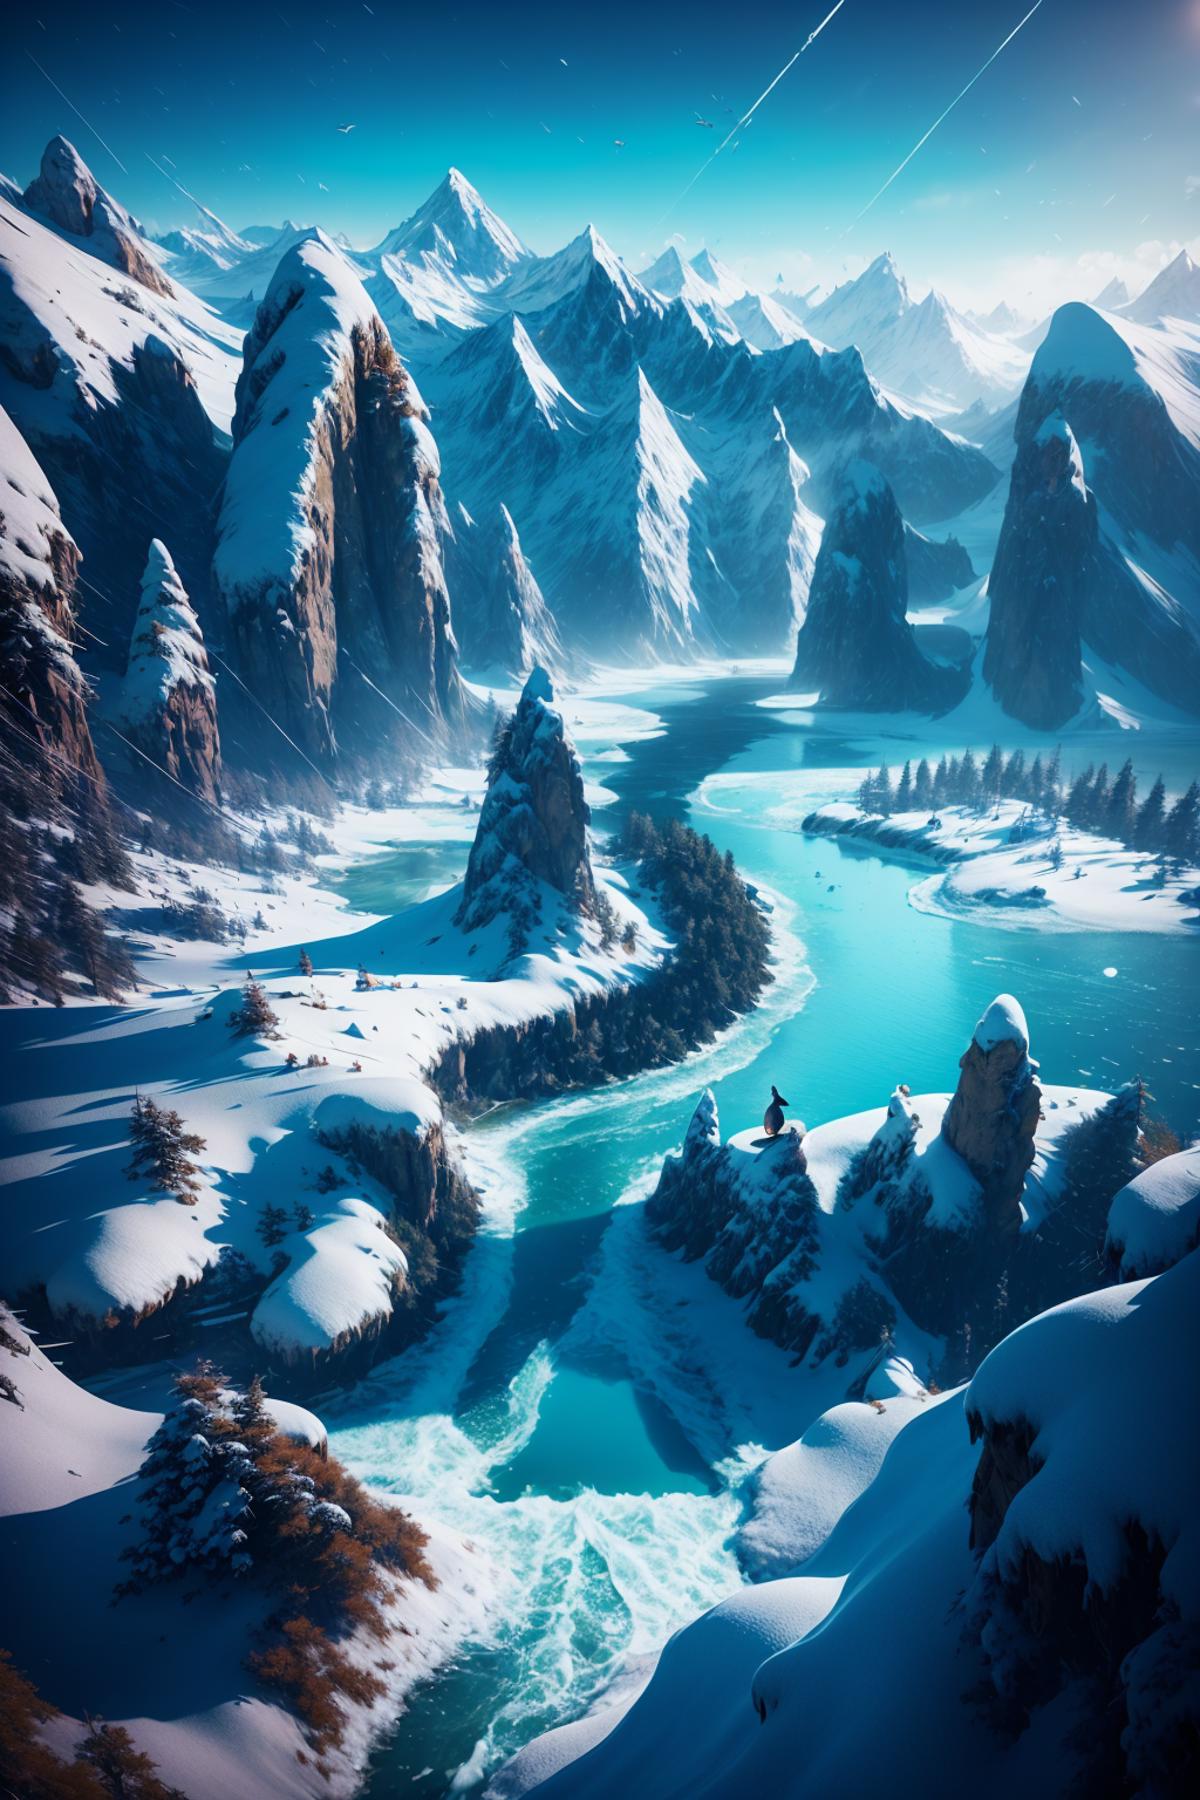 Ice Age image by CGArtist